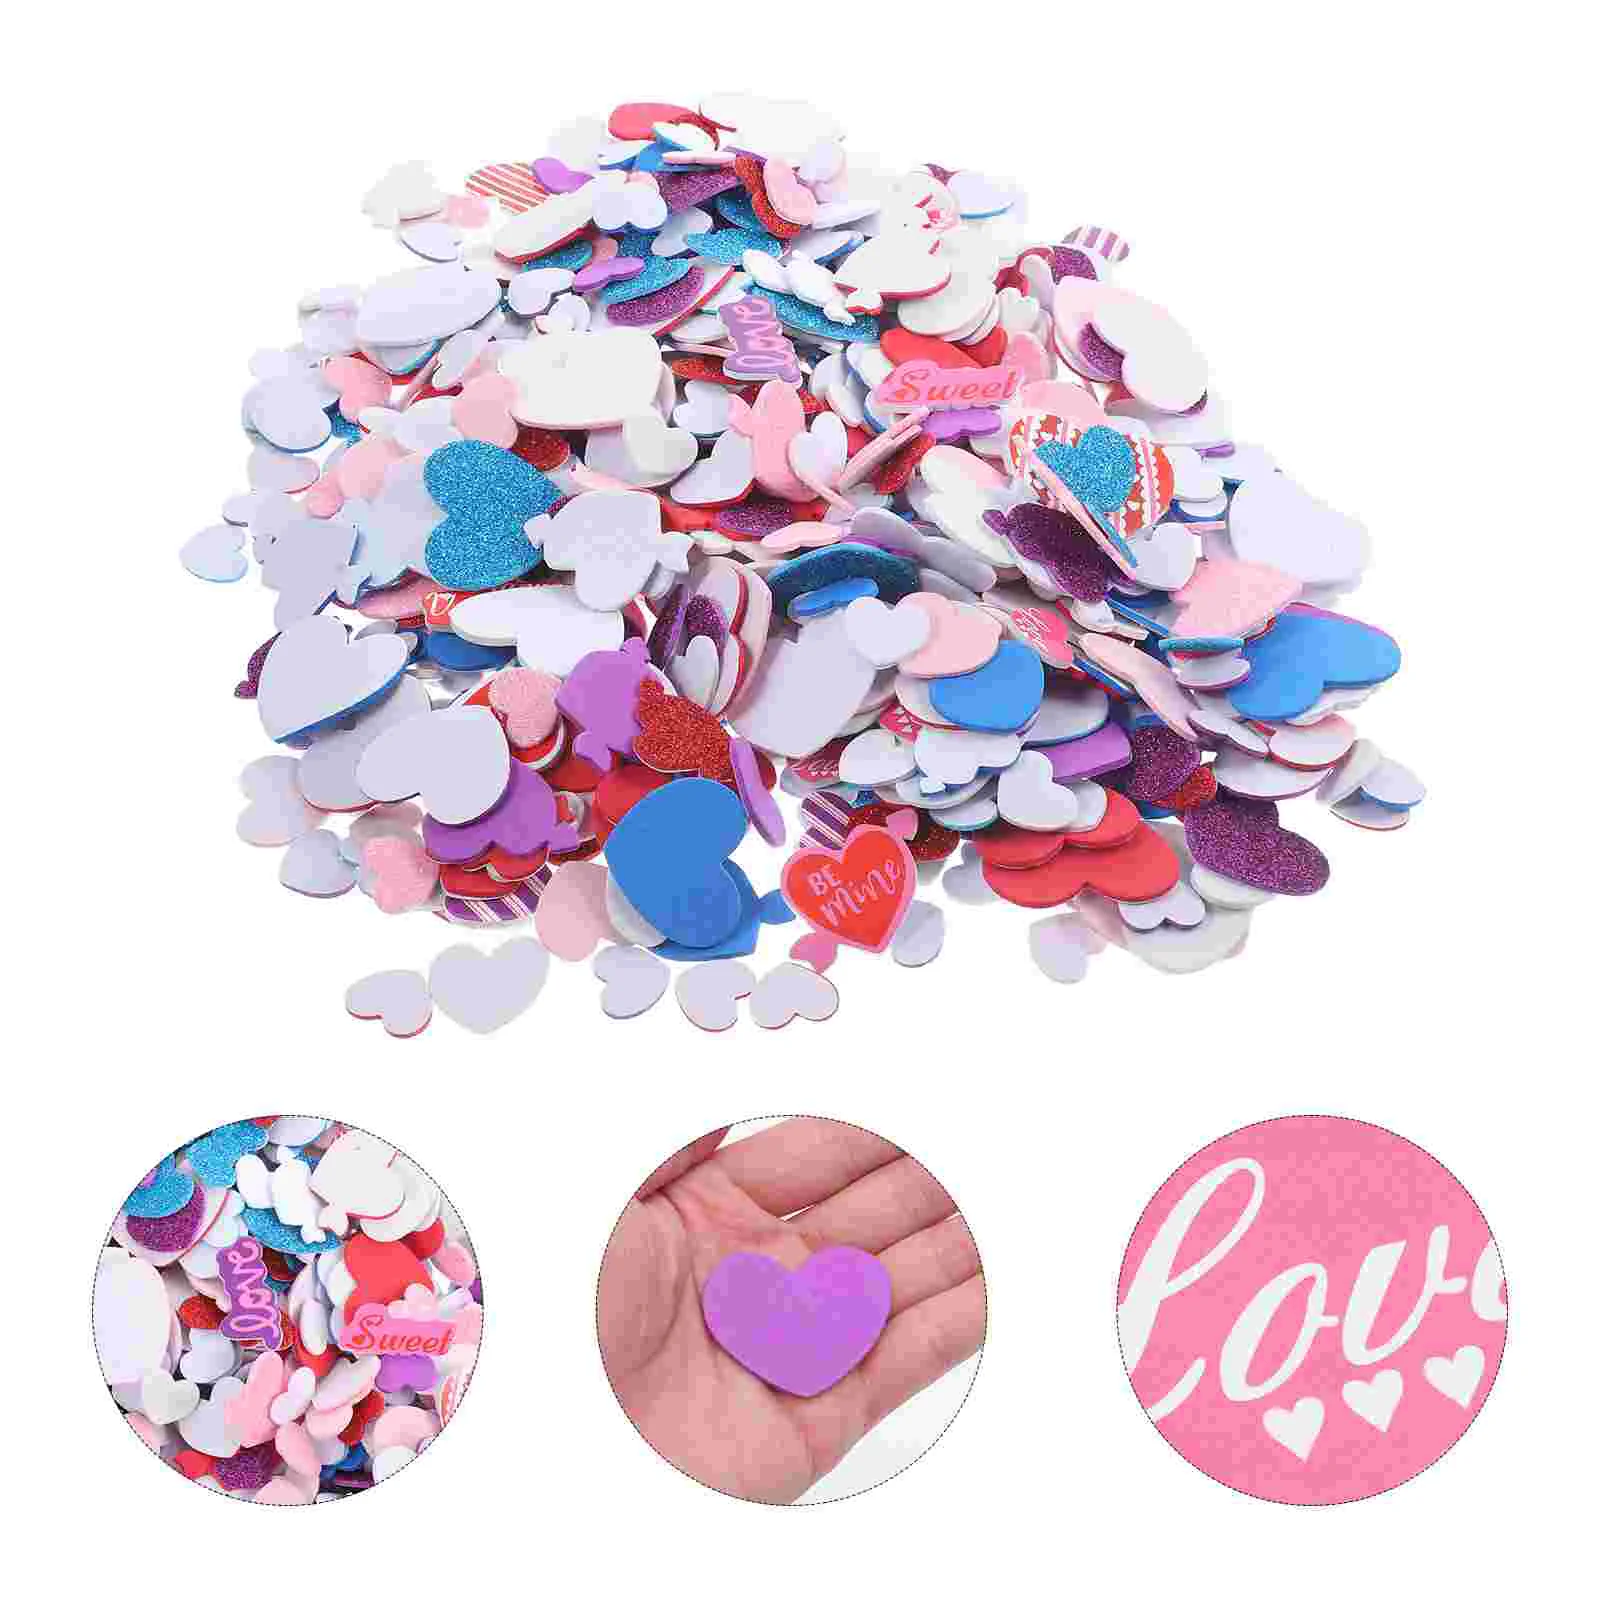 

Love Stickers Mini Heart Foam Letter Wedding Foams Valentine's Day Self-Adhesive Party Supplies Small